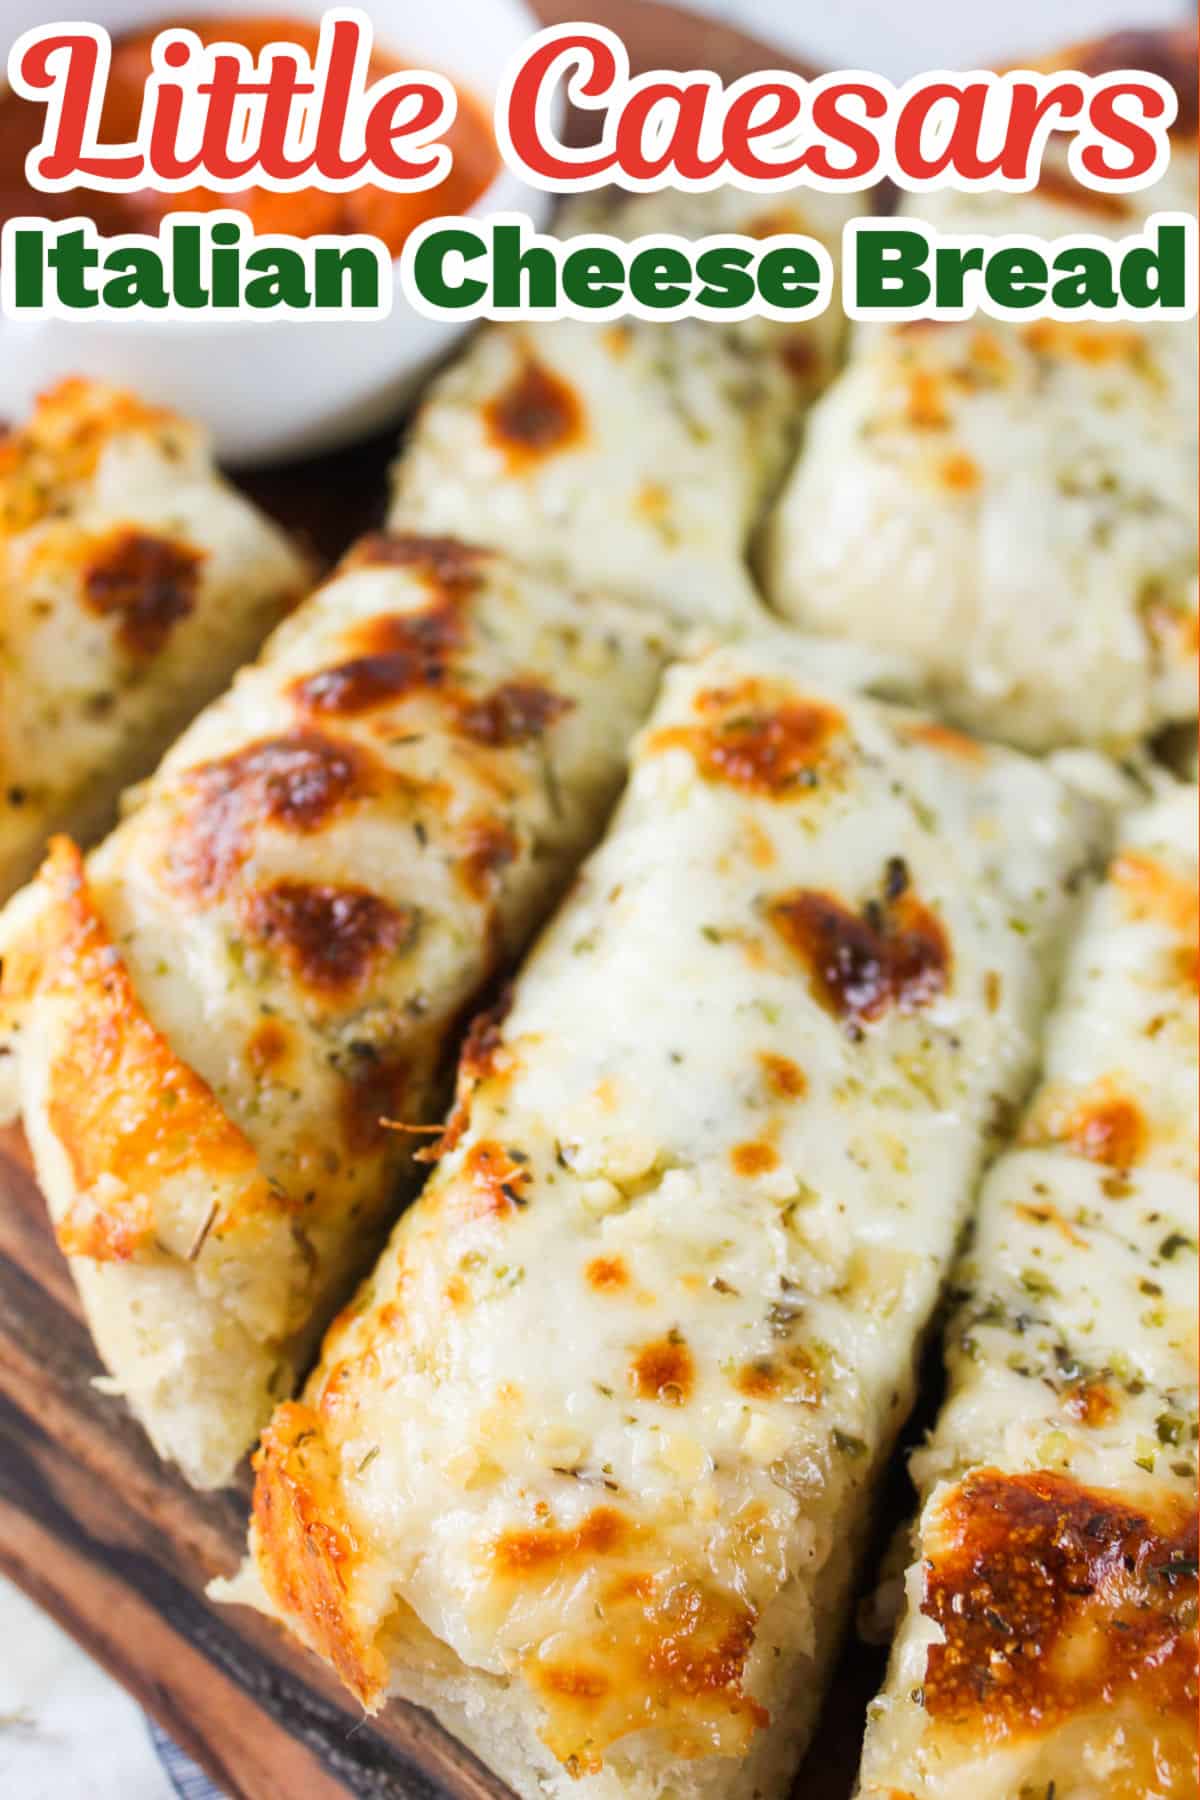 This Little Caesars Italian Cheese Bread is amazing!!! The crispy edge, the garlic butter and all that cheese! This Italian Cheese Bread will not disappoint - your family will be looking everywhere for the Little Caesars pizza box! via @foodhussy